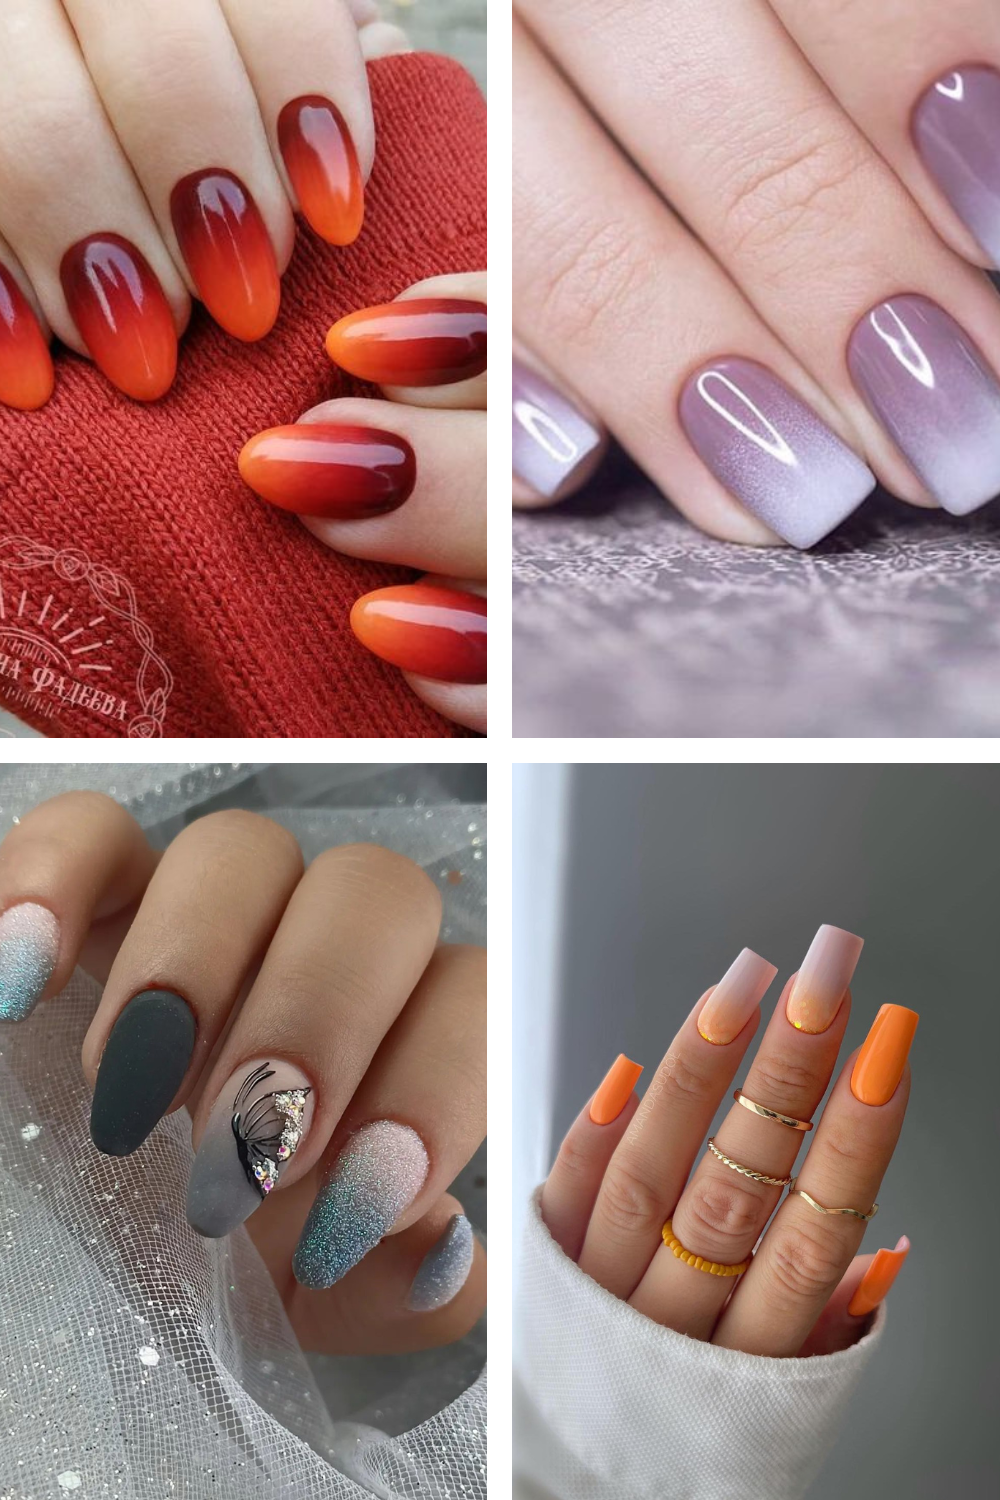 42 Ombre Nails That Are Out of This World Gorgeous!